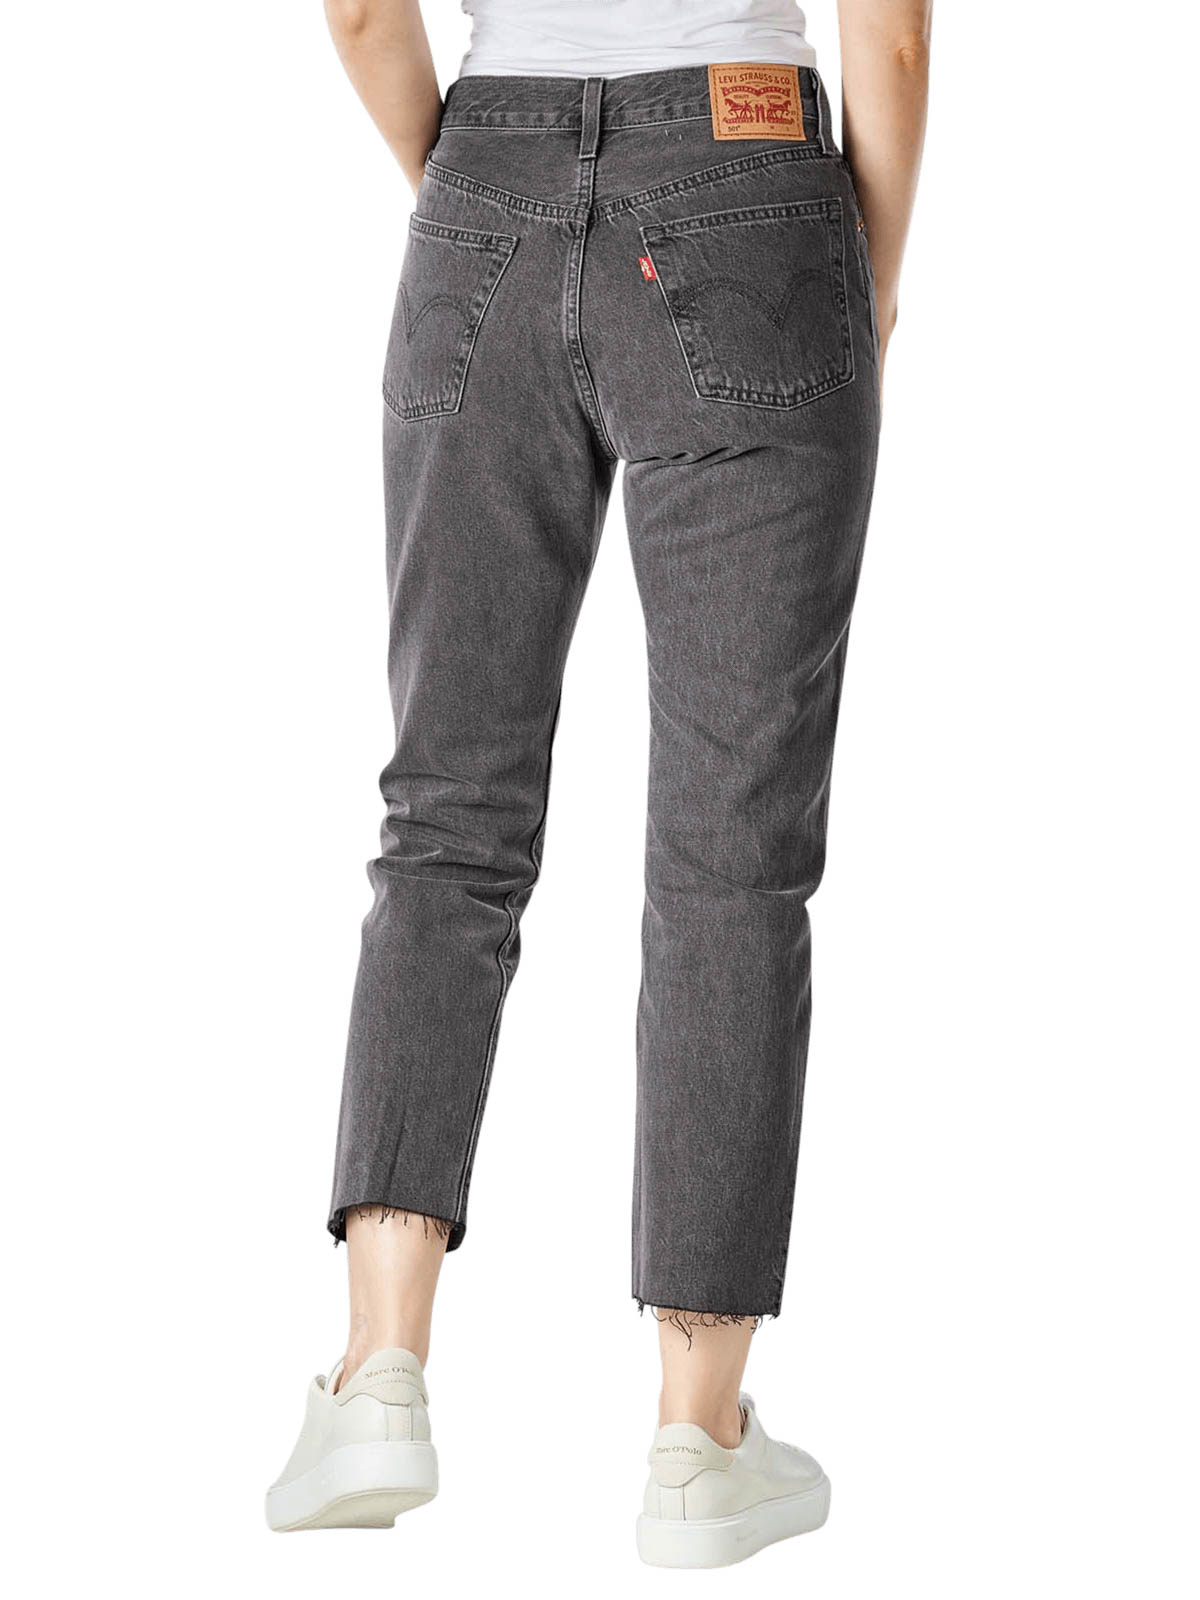 Levi's 501 Jeans Crop Get Off My Cloud Levi's Women's Jeans | Free Shipping  on  - SIMPLY LOOK GOOD